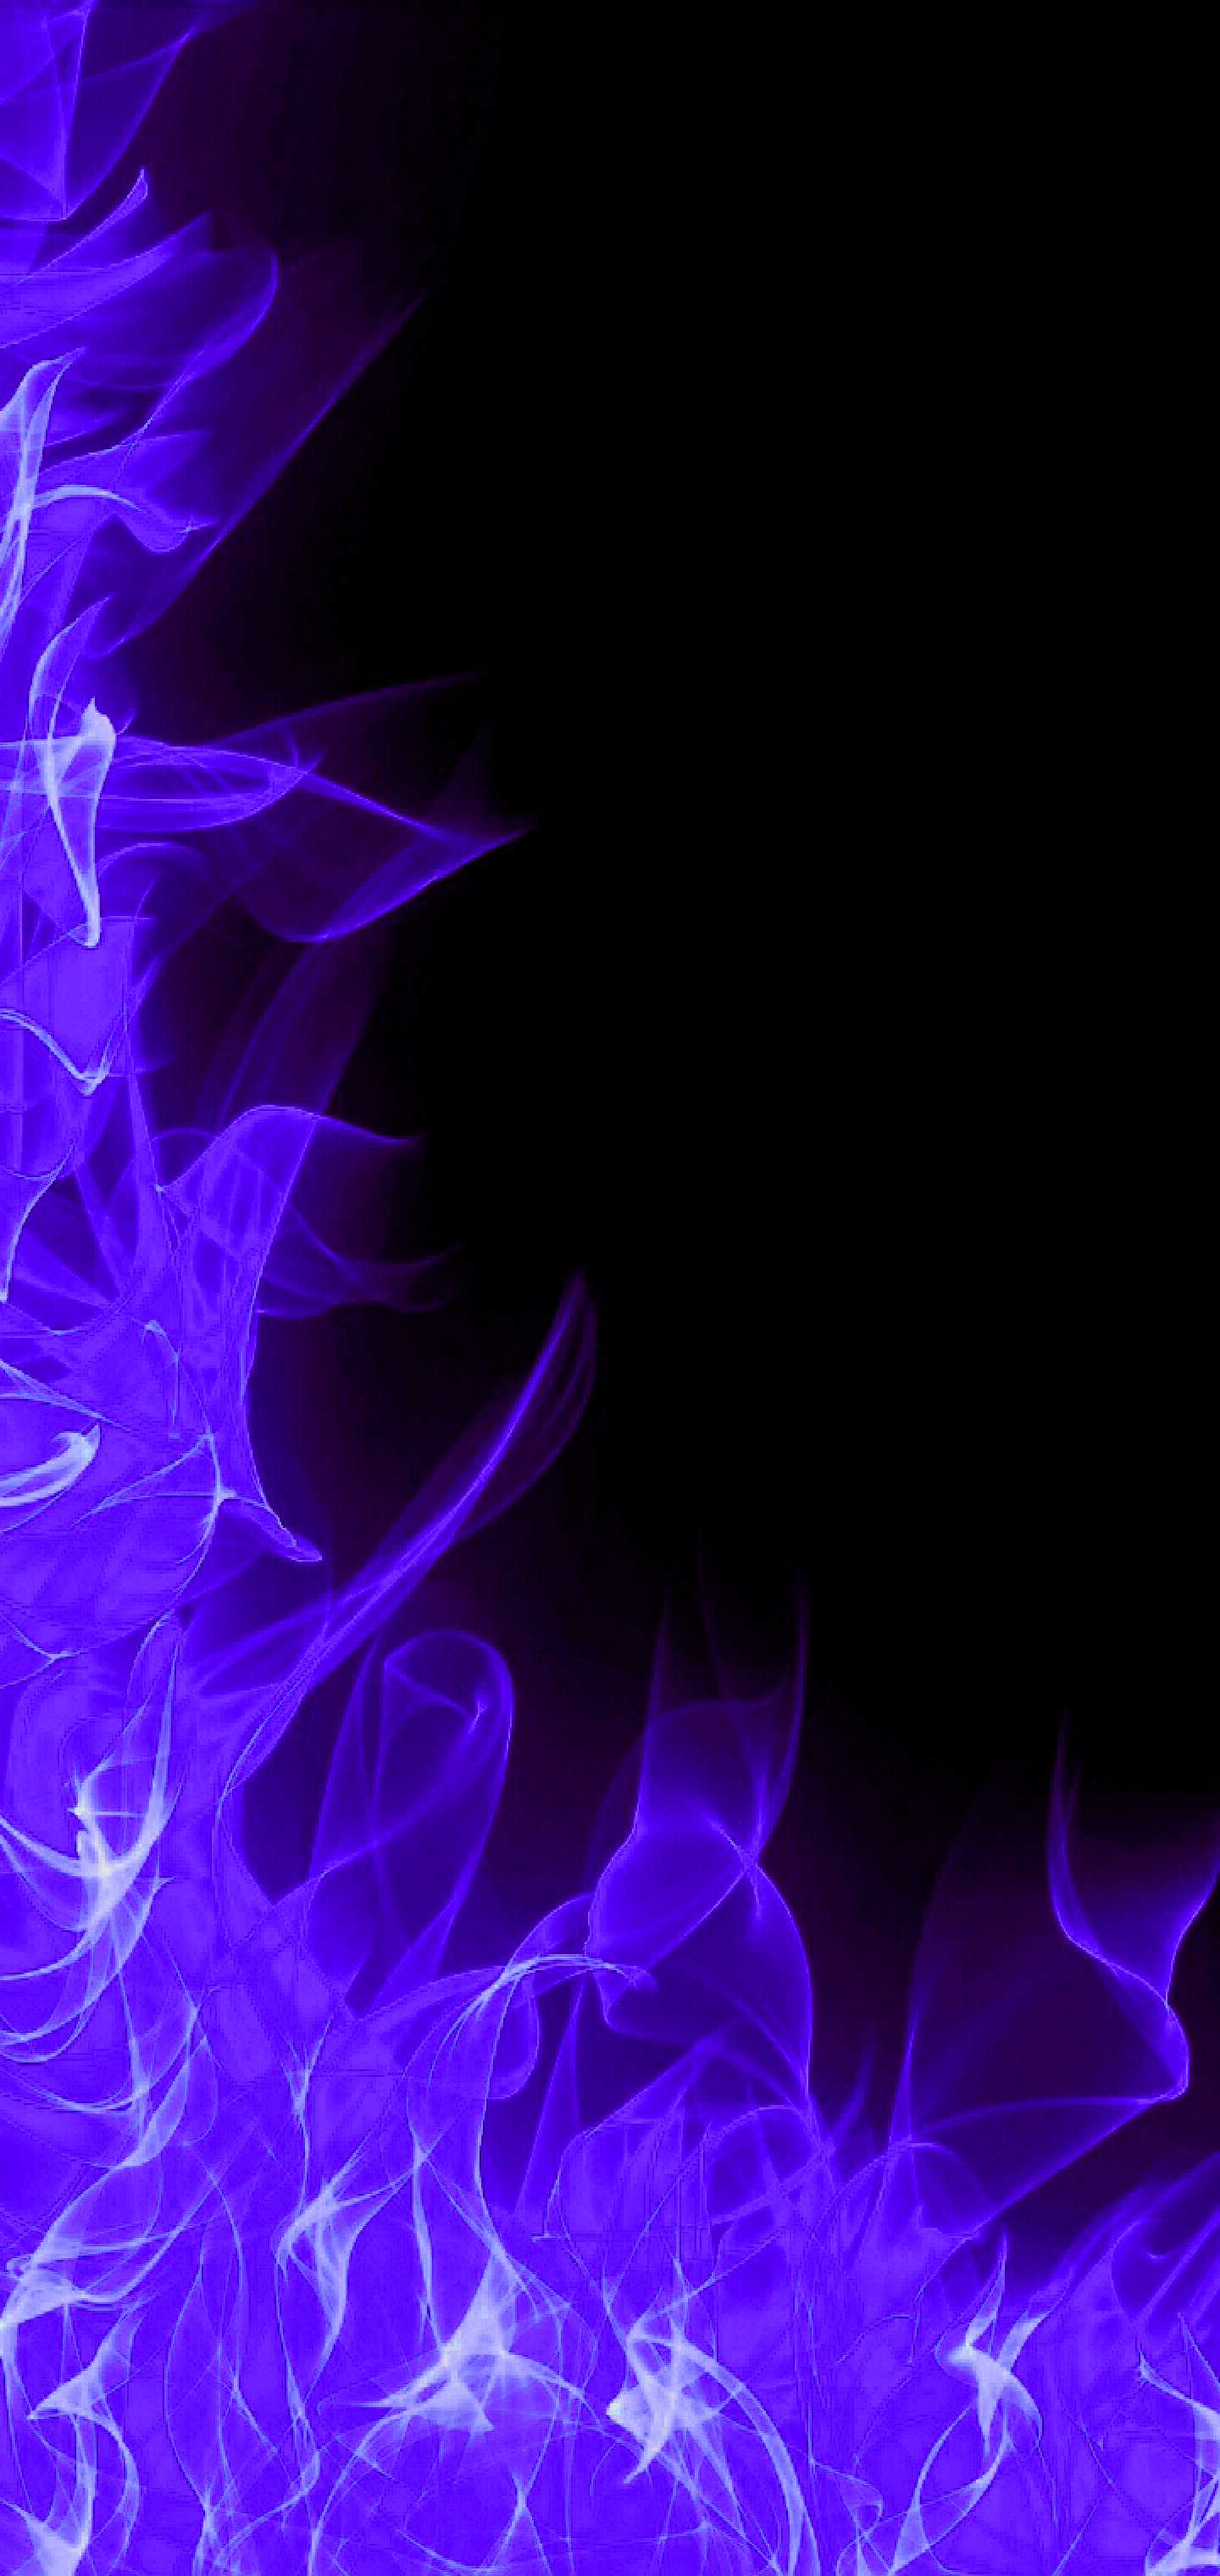 Fire Background 1